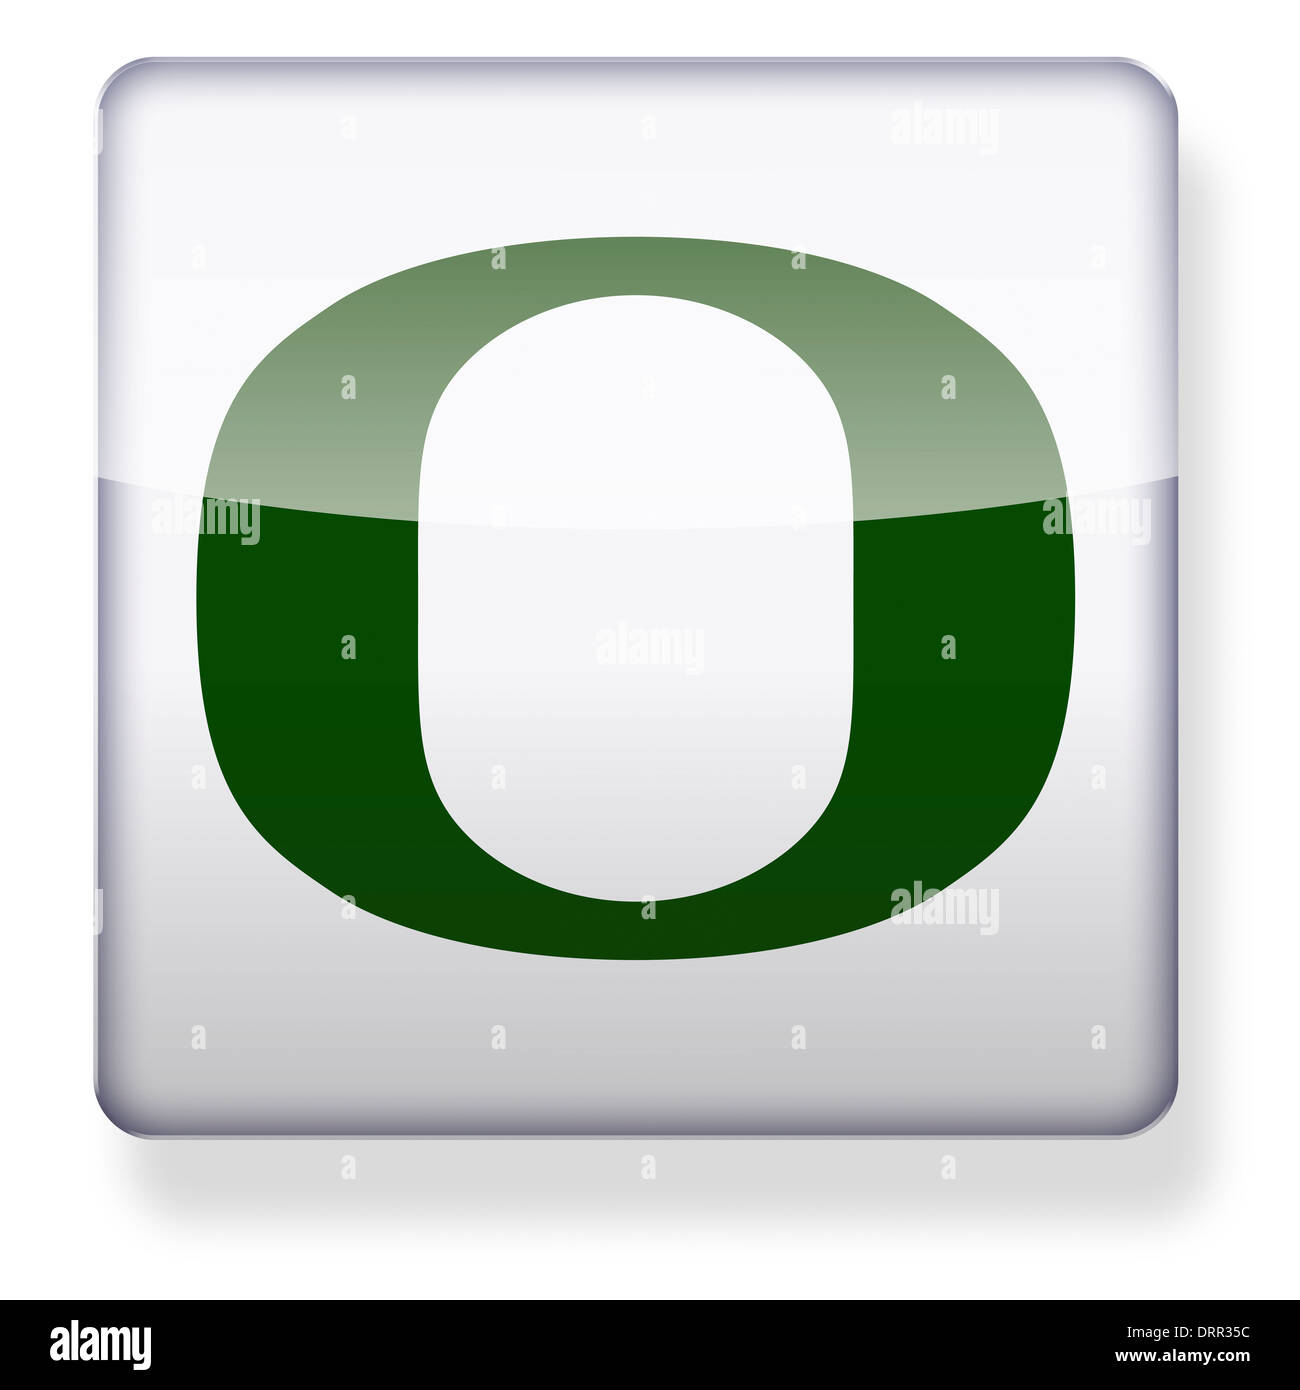 Oregon Ducks US college football logo as an app icon. Clipping path included. Stock Photo